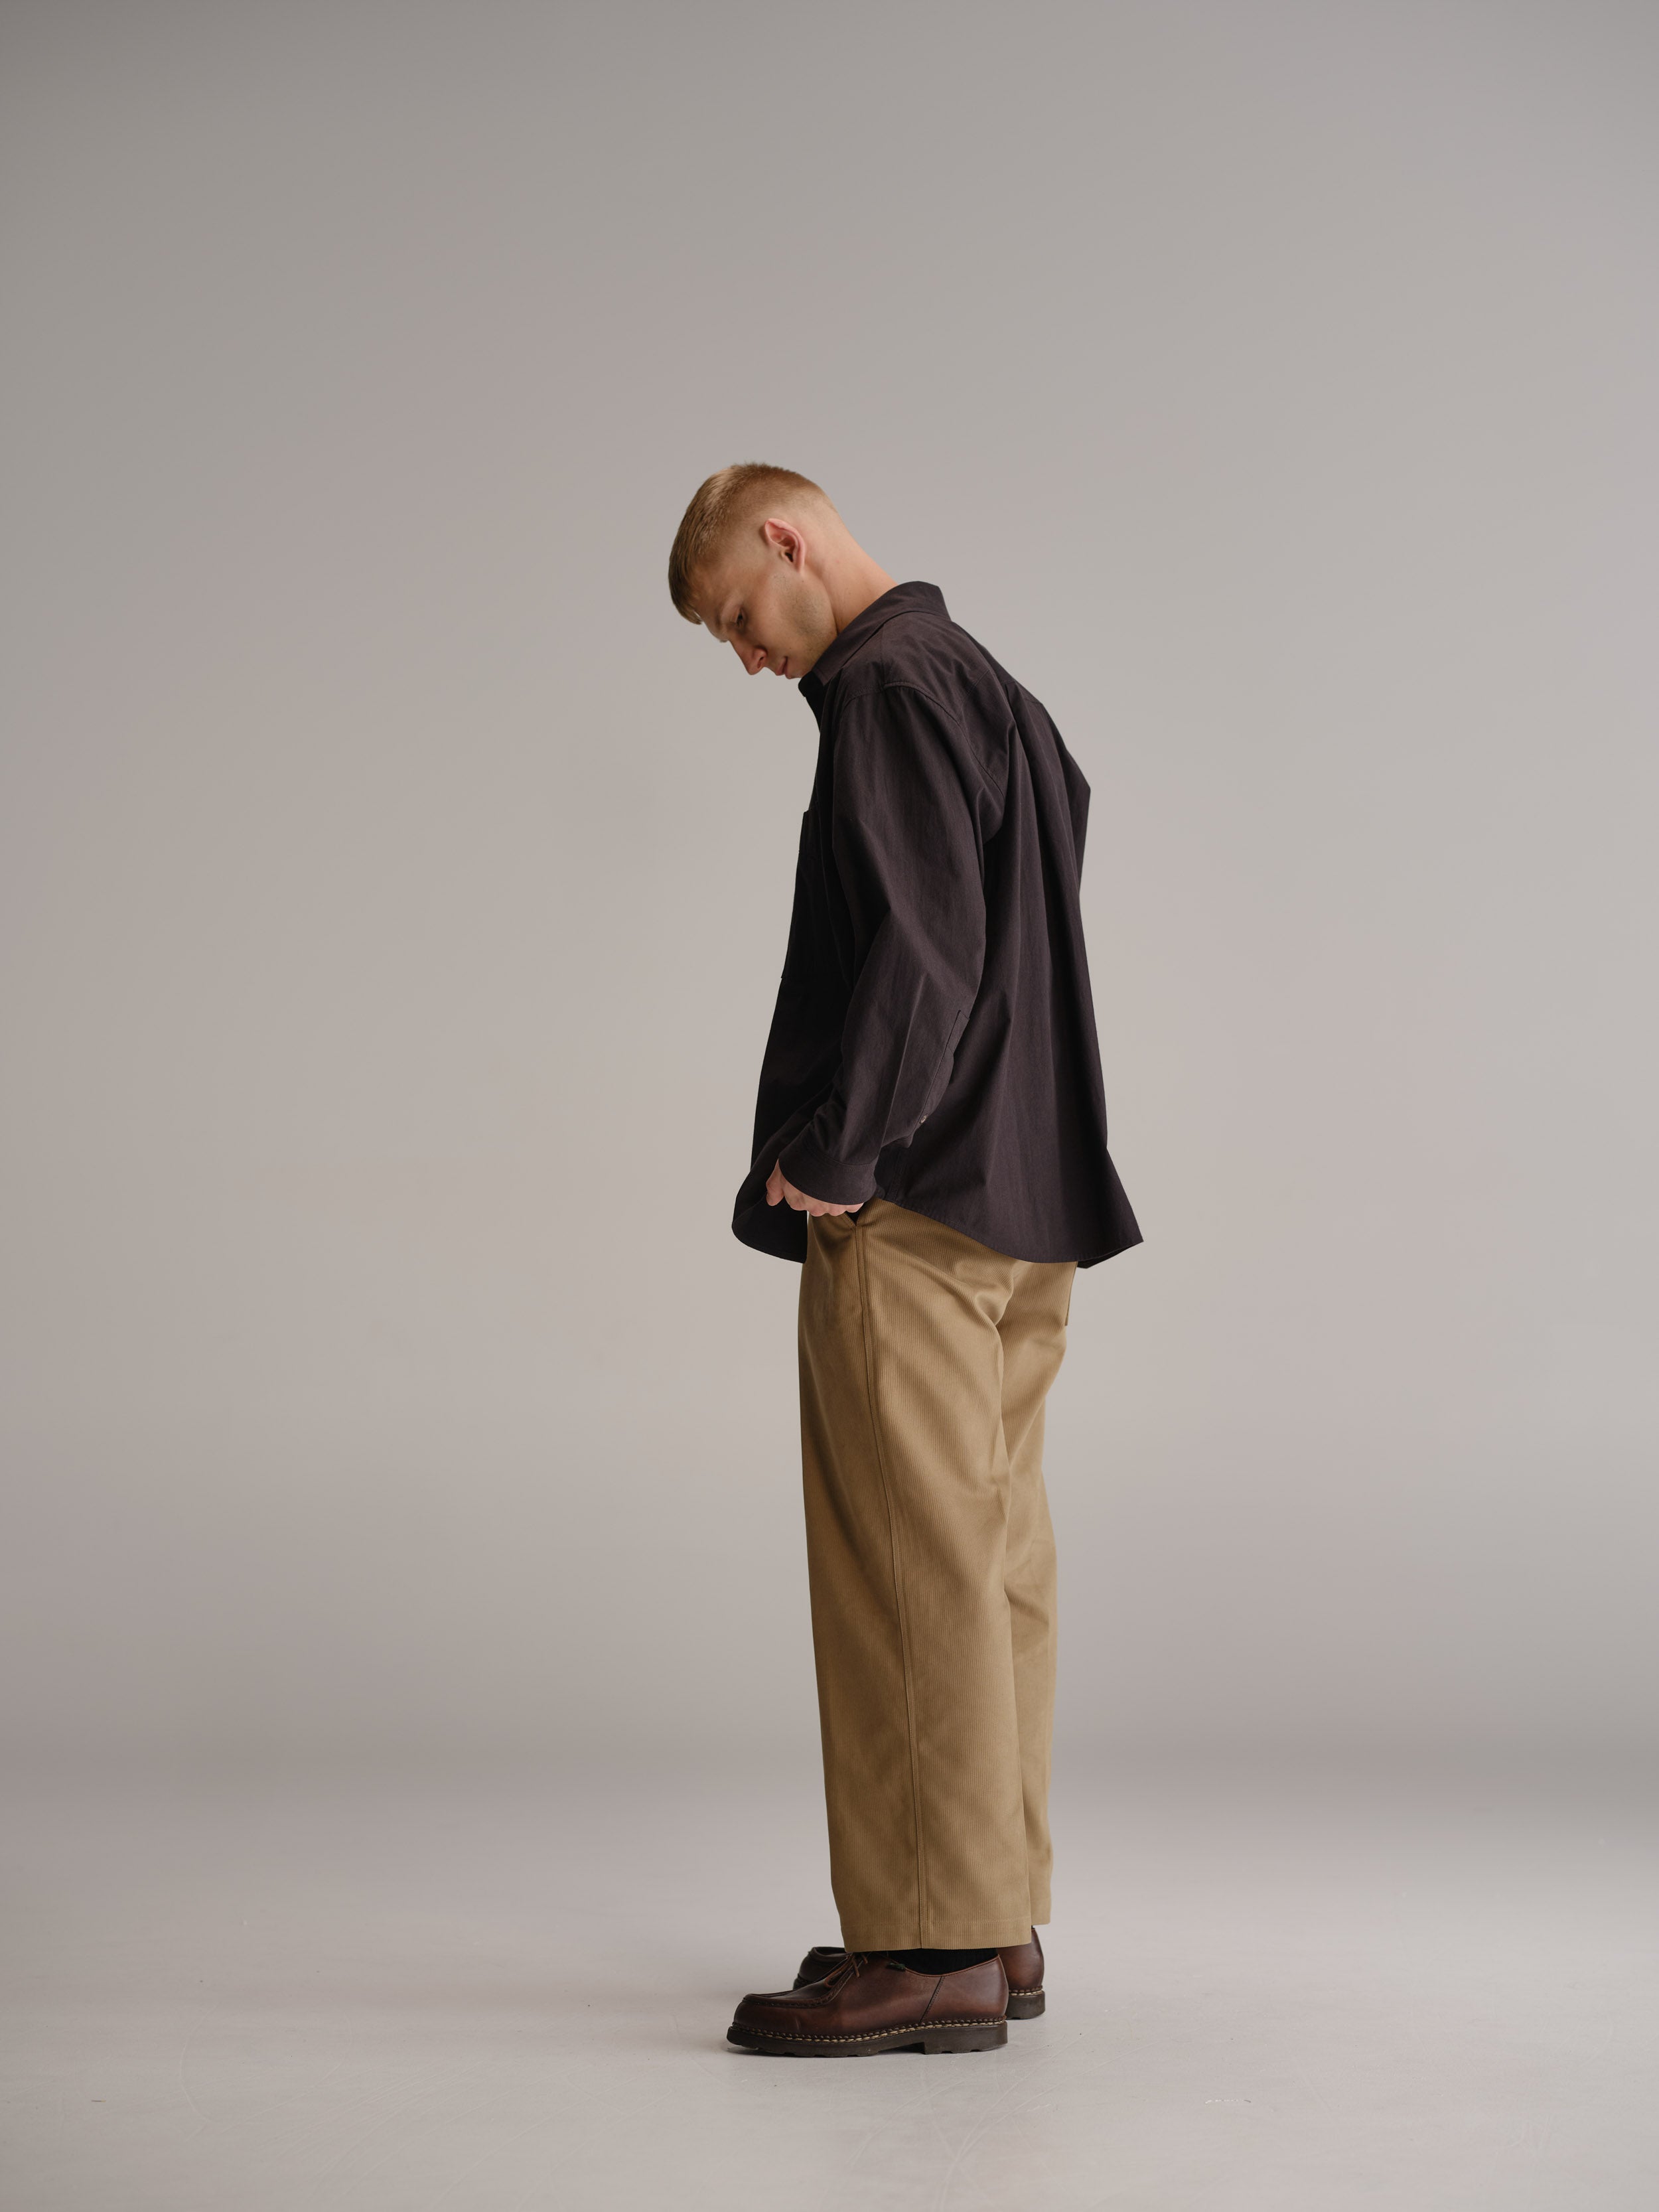 Side view of man standing in white studio wearing black shirt, tucked in black t-shirt, fawn pant and brown leather shoes.